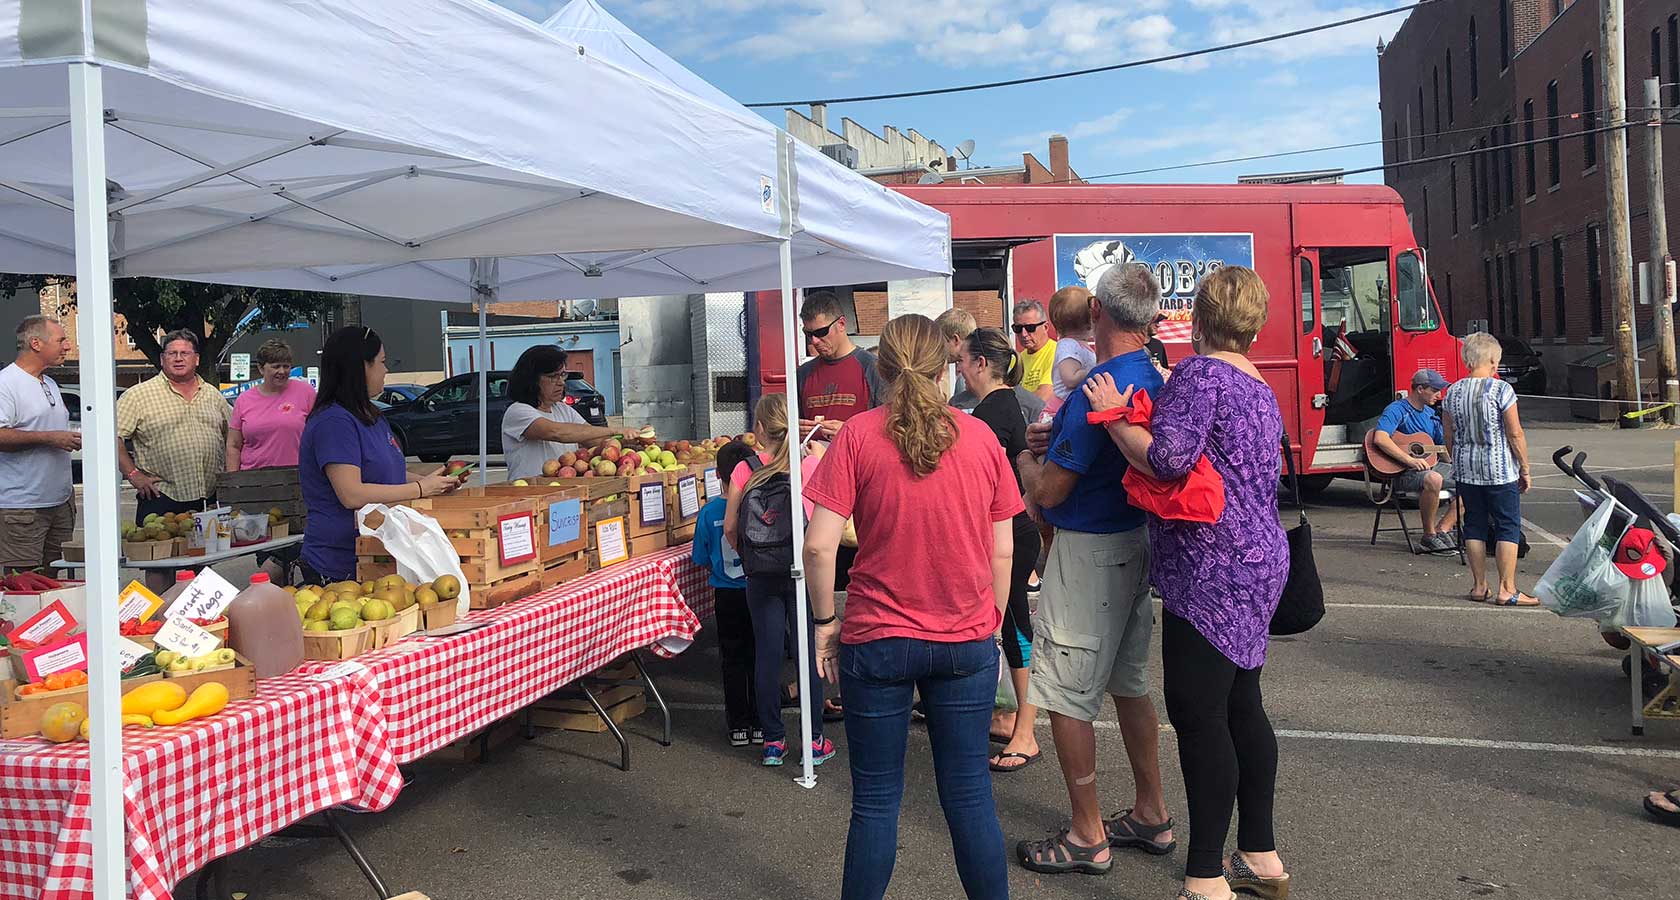 groups of people at an outdoor farmer’s market in Lancaster, ohio